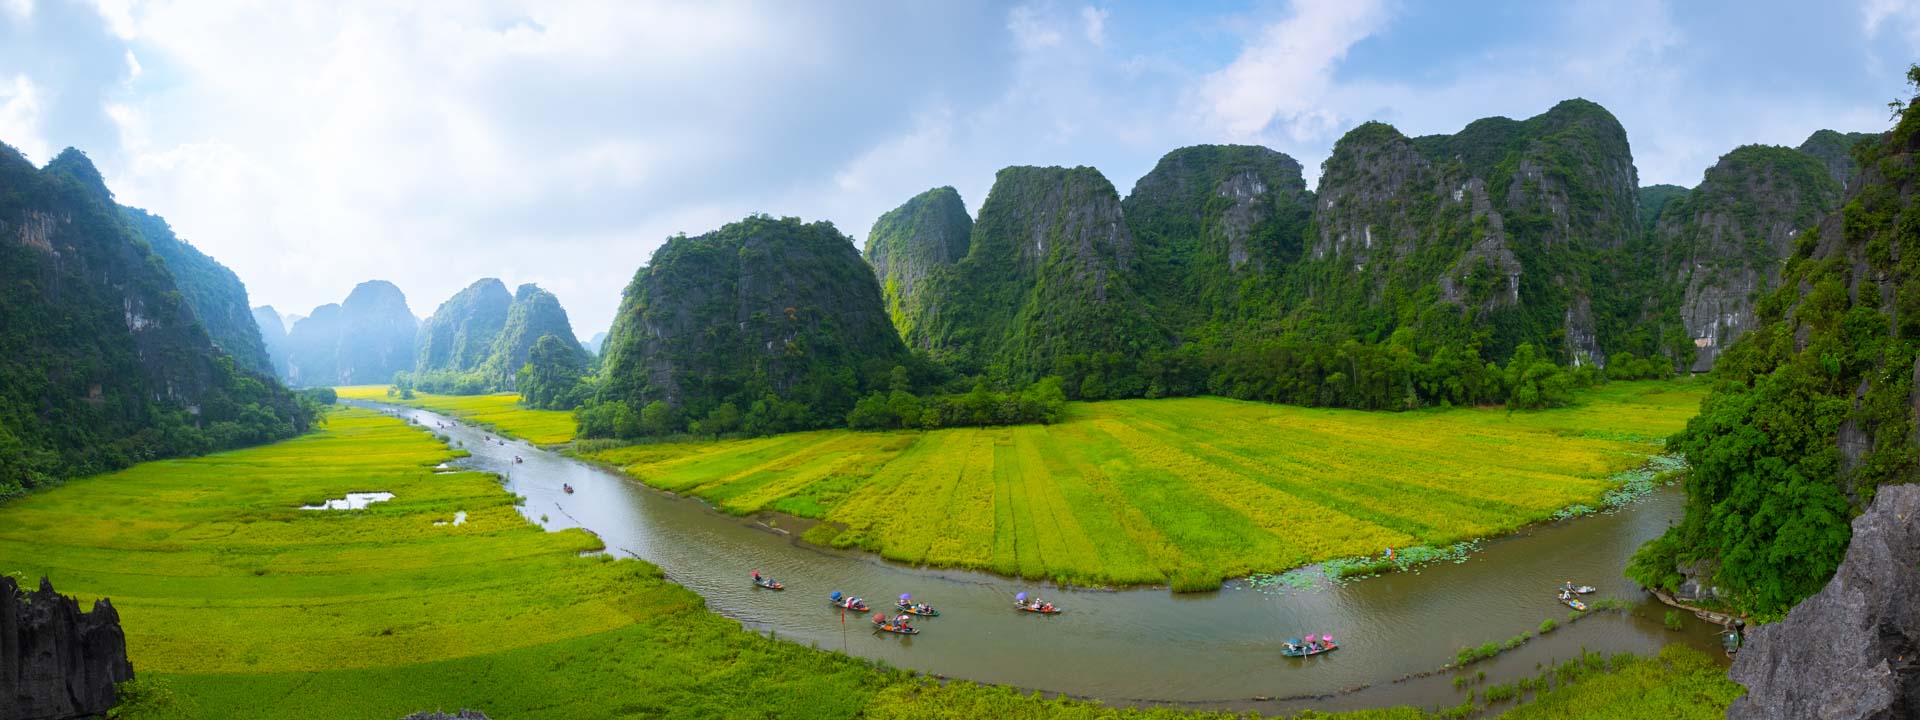 Discover Authenticity. Explore Hanoi Like Locals. Experience Rustic and Comfortable Homestay. Cruise Artfully in Halong Bay and Cat Ba Archipelago. This trip has it all.